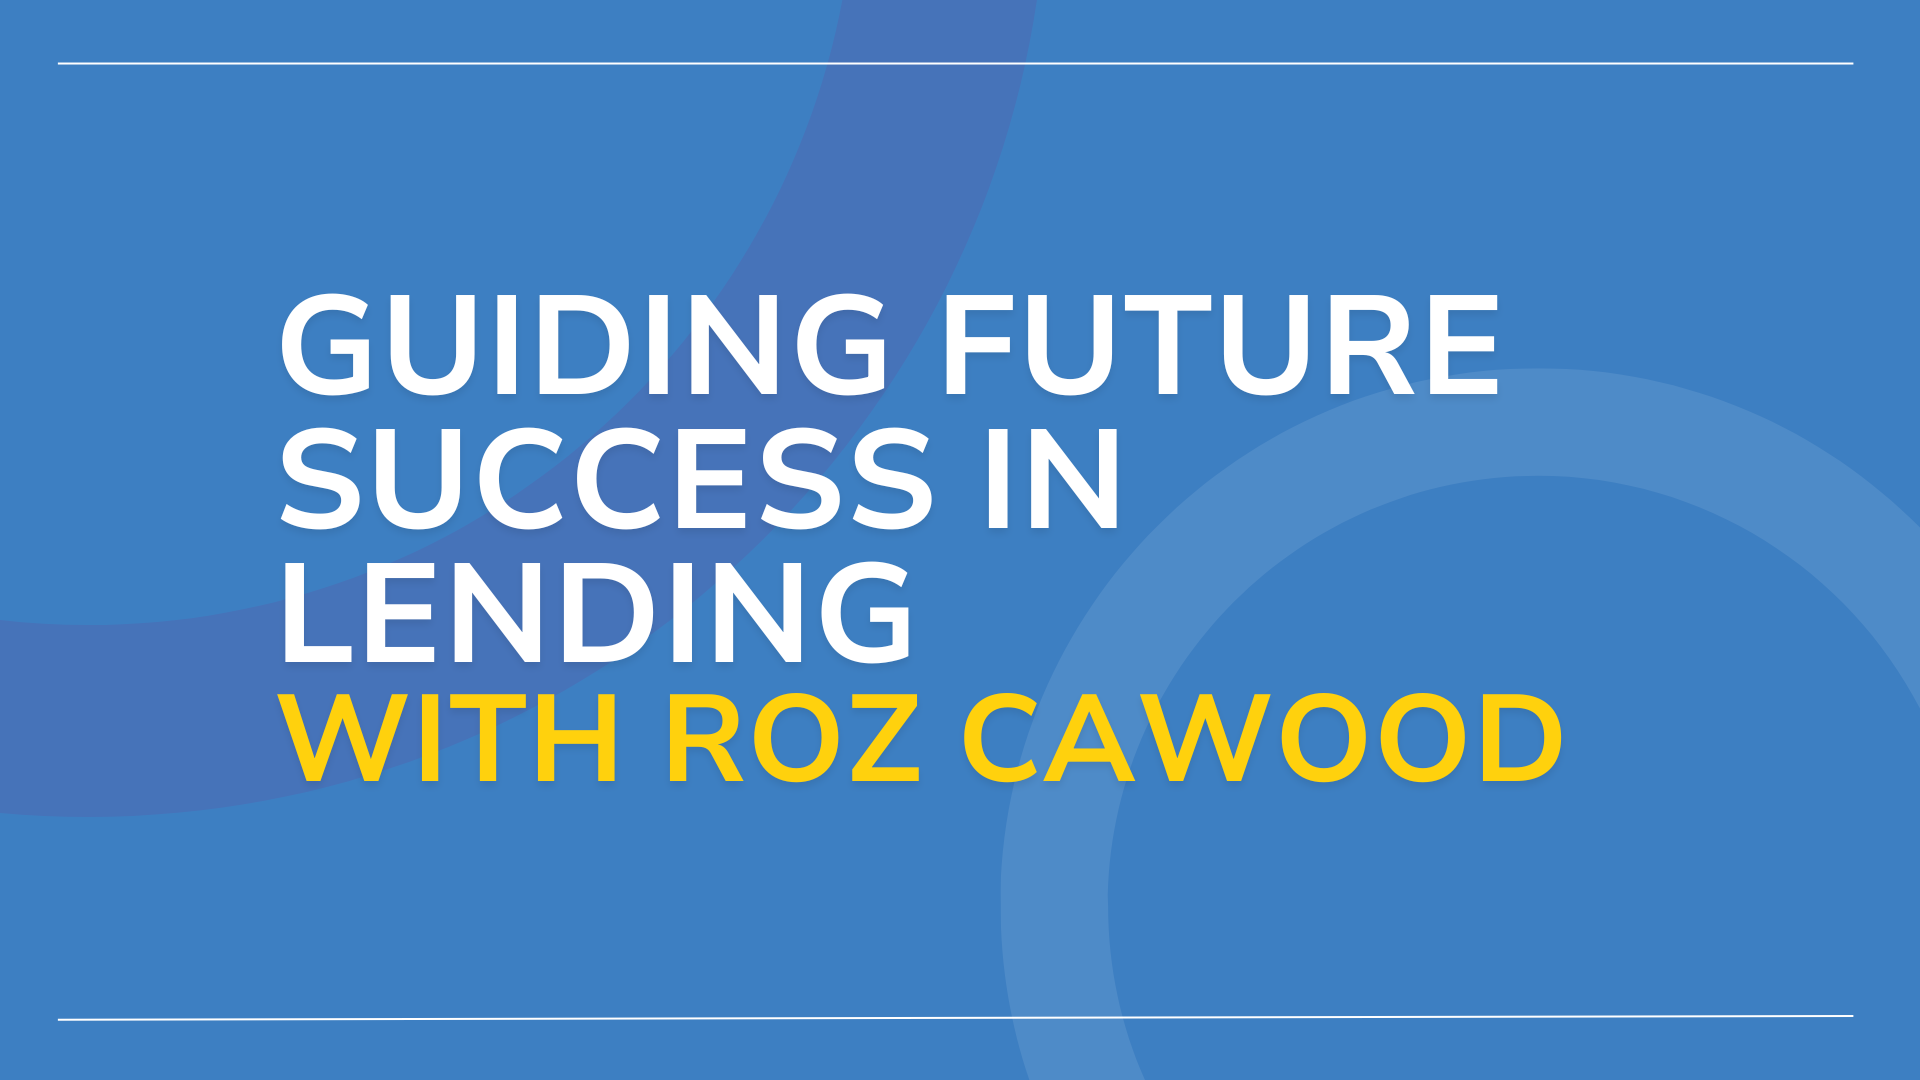 Guiding Future Success in Lending with Roz Cawood